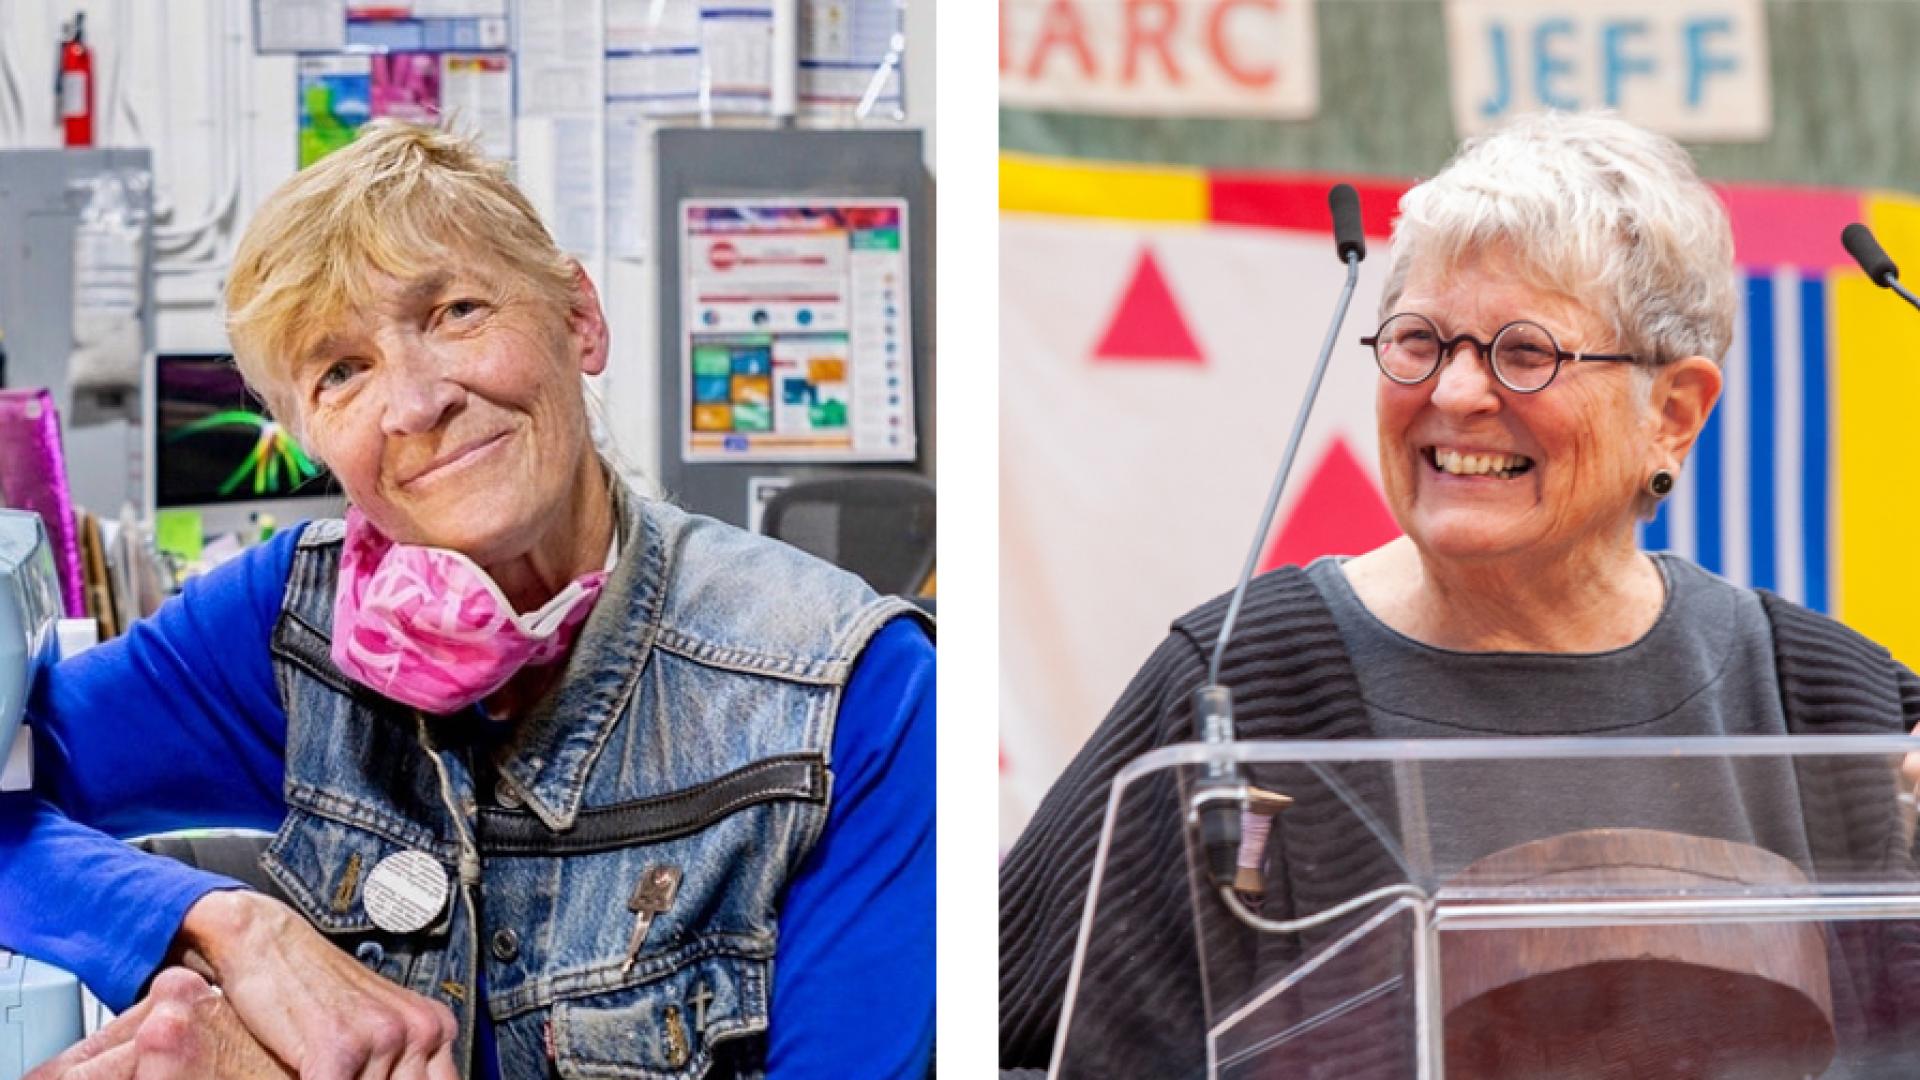 Stitching Communities: A Conversation with Gert McMullin and Leslie Ewing